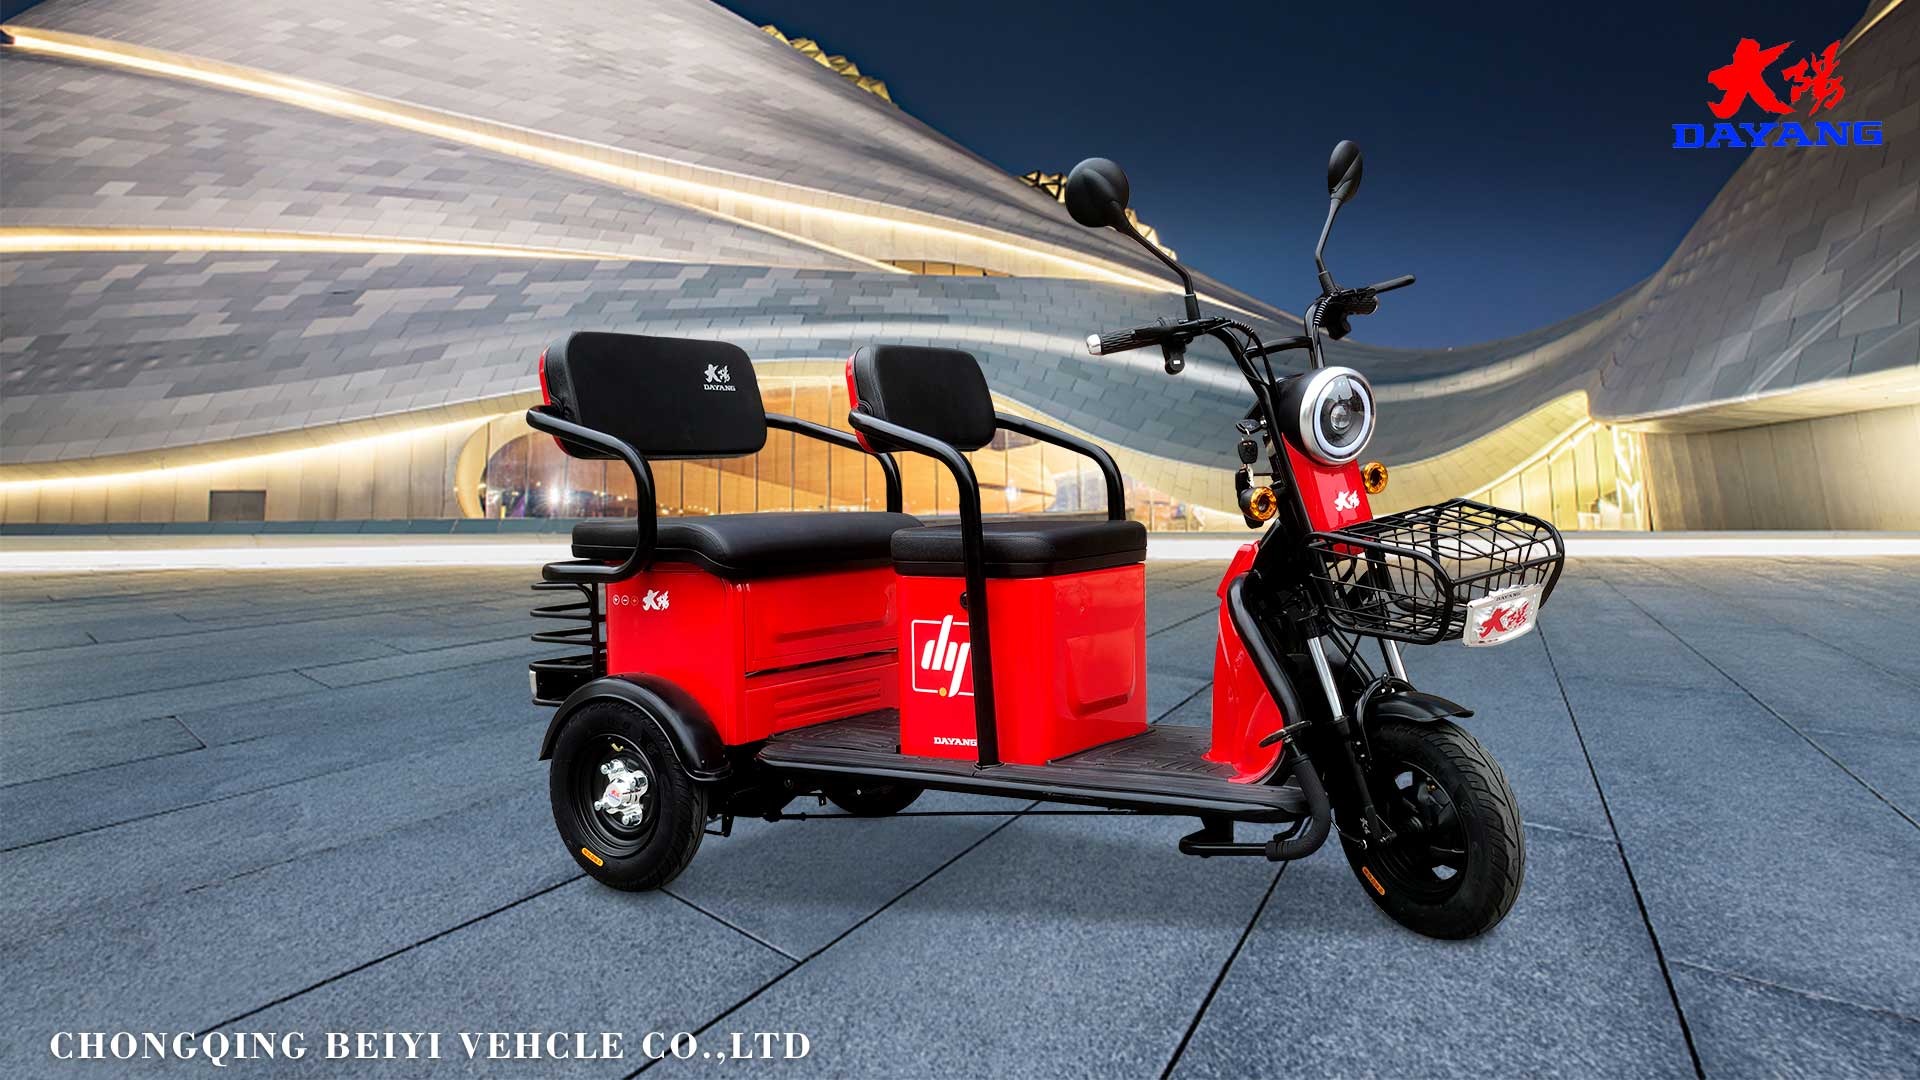 DAYANG Three Wheel Electric Mini Scooter Tricycle for Adult Max Red Body Good Look Electric Tricycles 500w motor Power